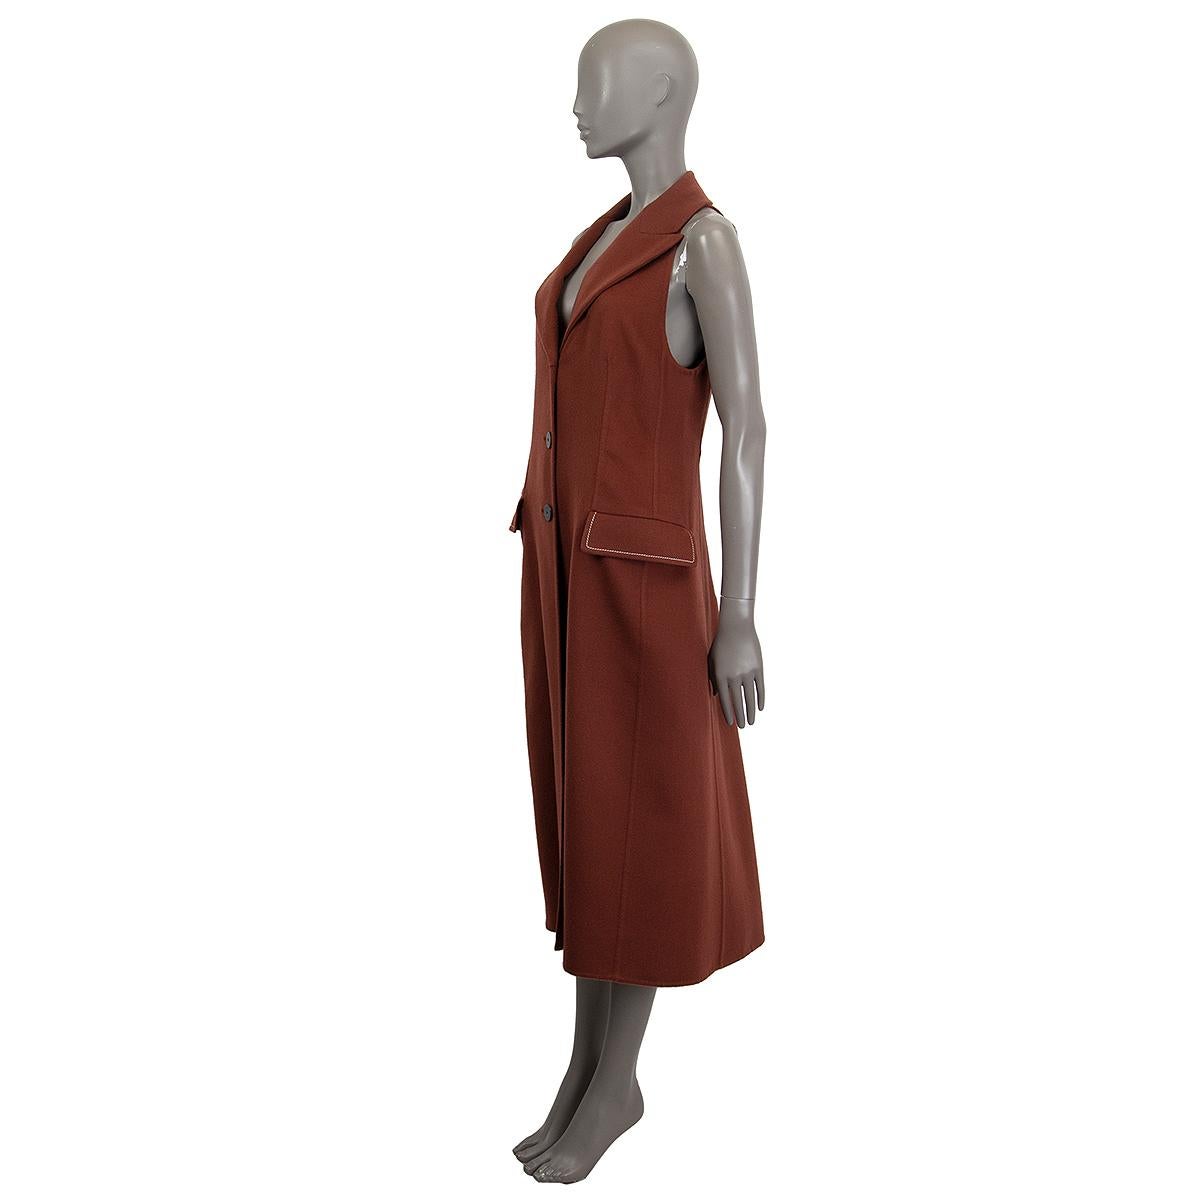 Hermès vest in terra cotta cashmere (100%) with fron flap pocket with white stiching. Closes on the front with buttons. Unlined. Has been worn and is in excellent condition. 

Tag Size 38
Size S
Bust From 84cm (32.8in)
Waist From 84cm (32.8in)
Hips